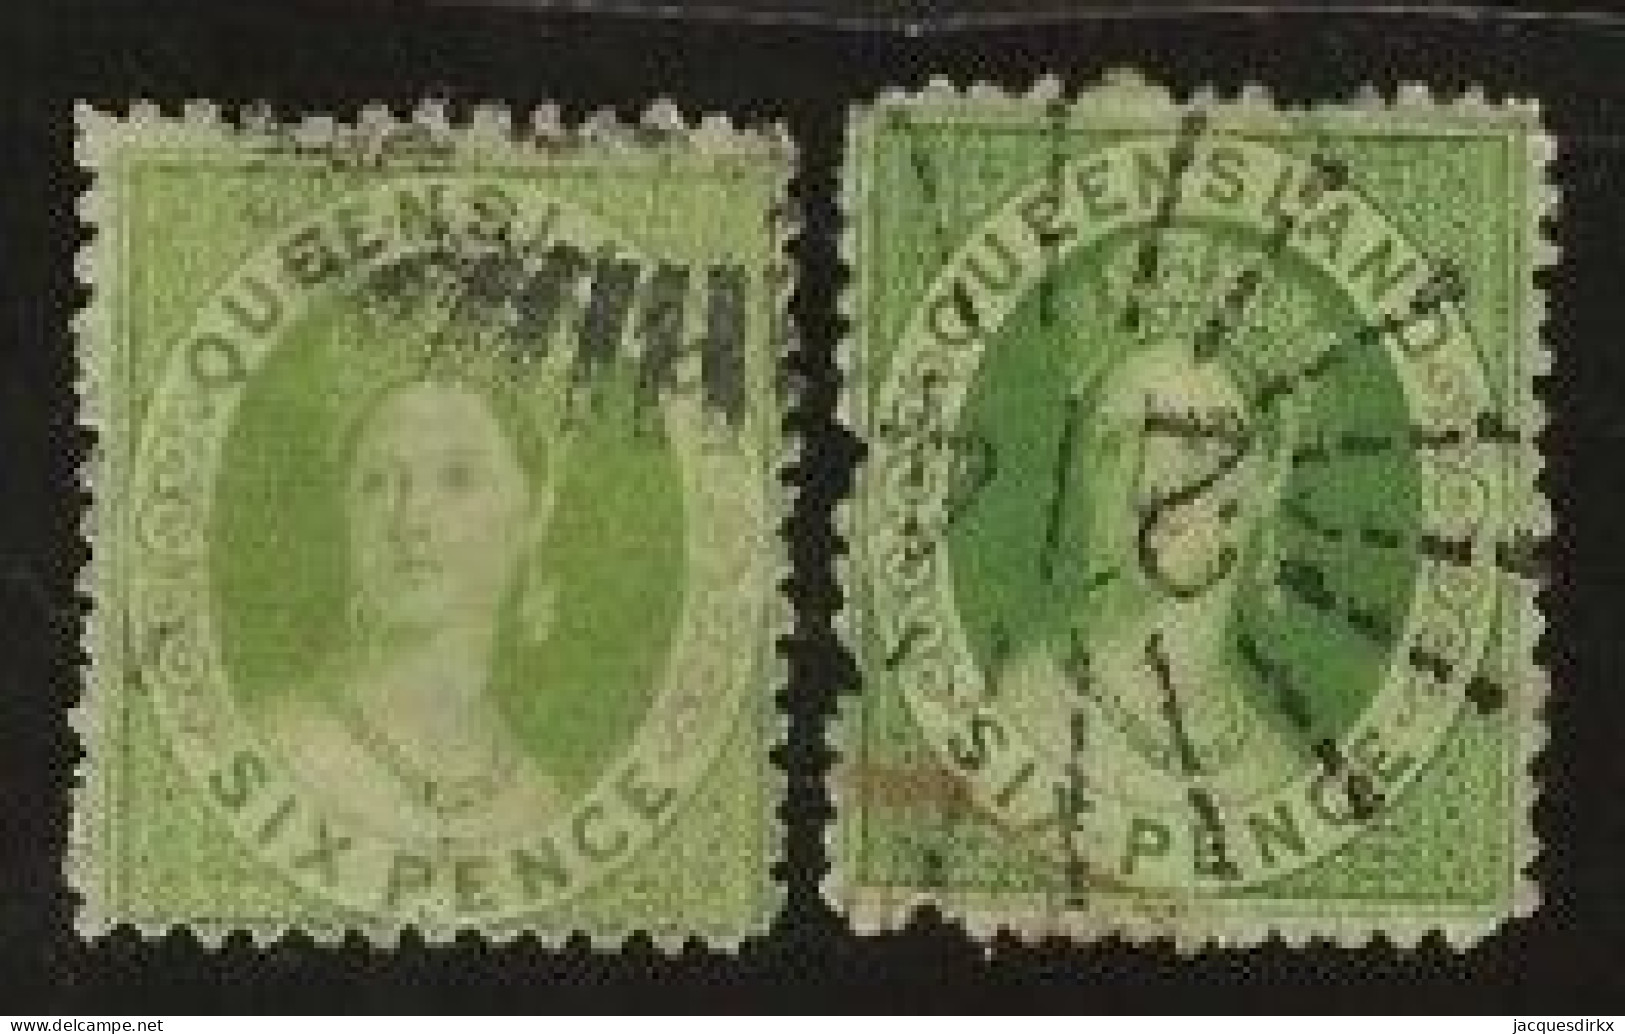 Queensland    .   SG    .   105  2x    .   O      .     Cancelled - Used Stamps